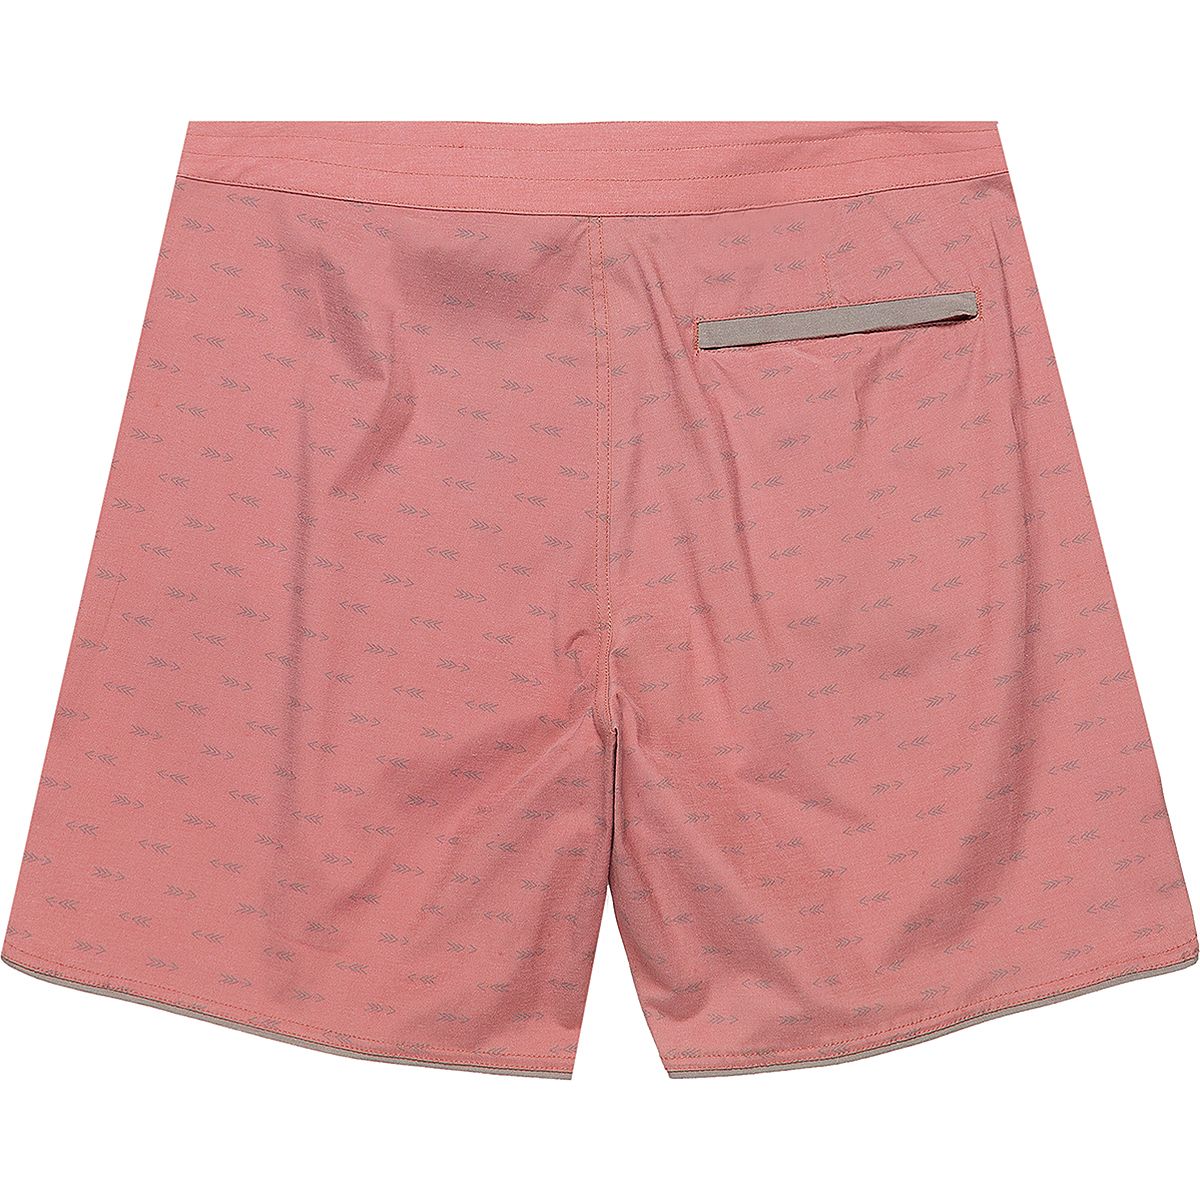 United by Blue Longbow Scallop Board Short - Men's - Clothing